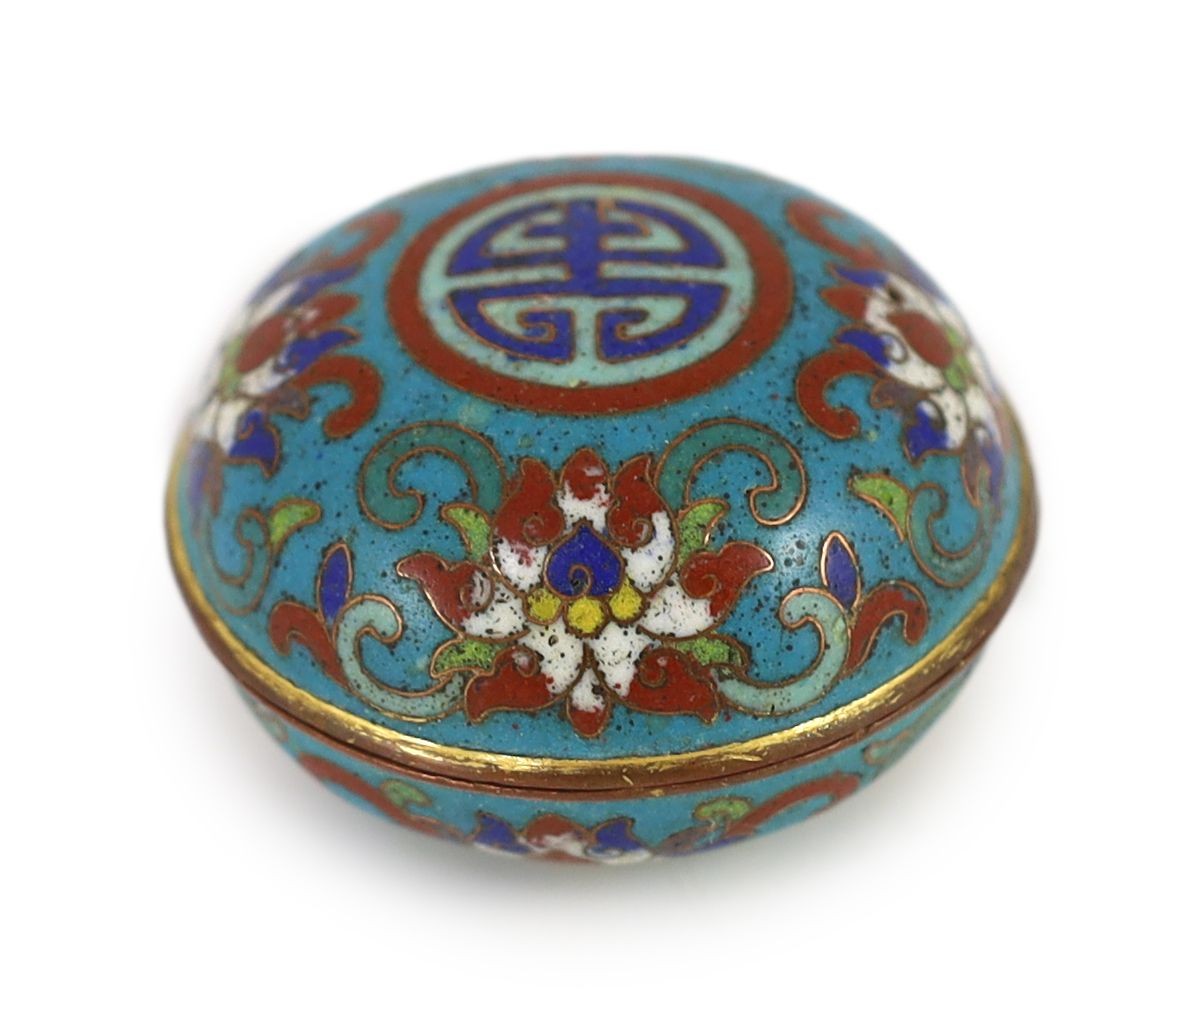 A Chinese cloisonné enamel seal paste box and cover, 17th/18th century, 5.5 cm diameter